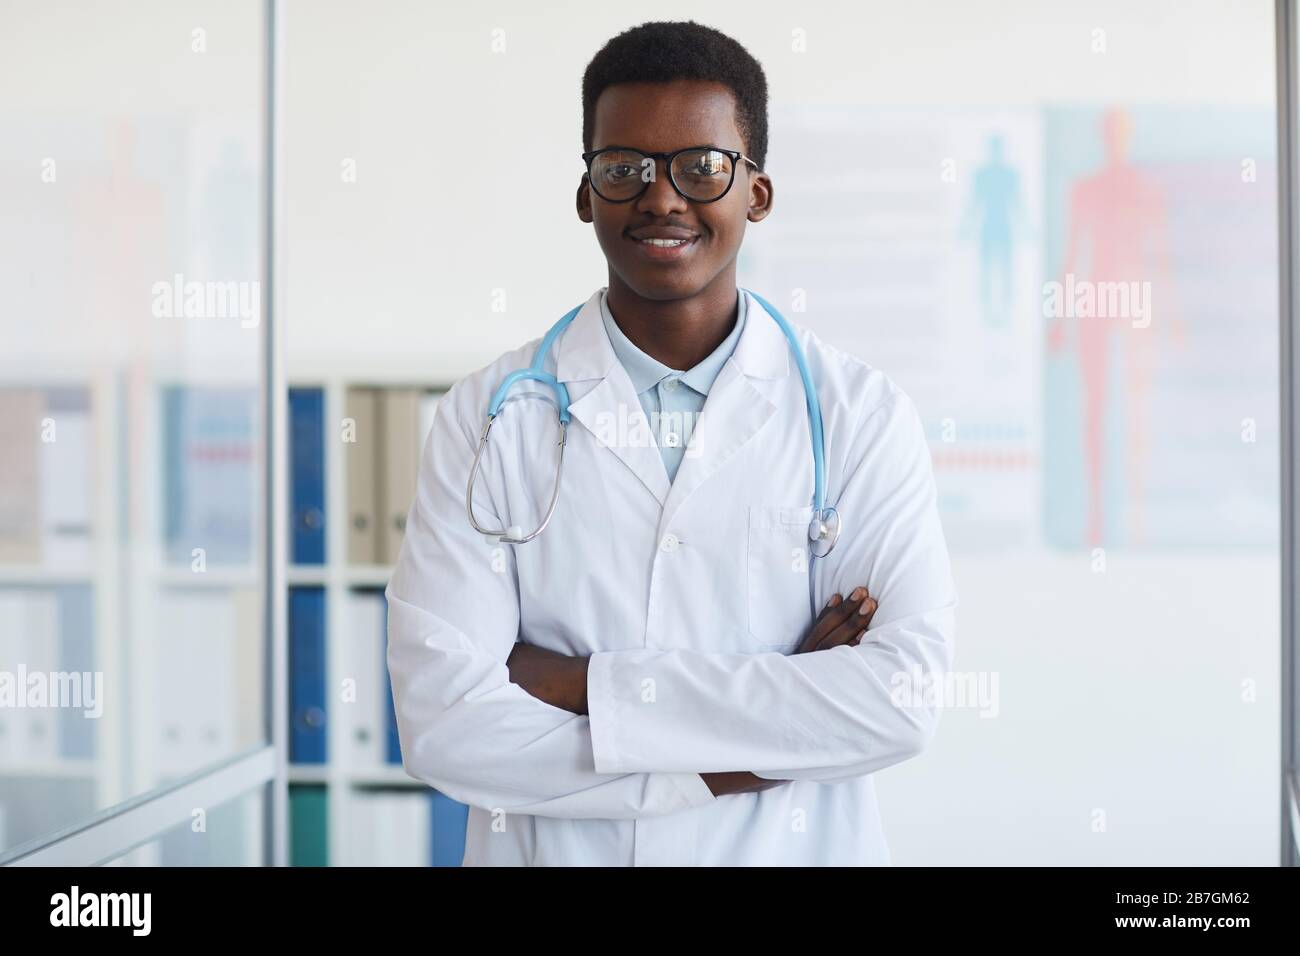 Waist up portrait of young African-American doctor standing with arms crossed and smiling at camera while posing in med clinic, copy space Stock Photo